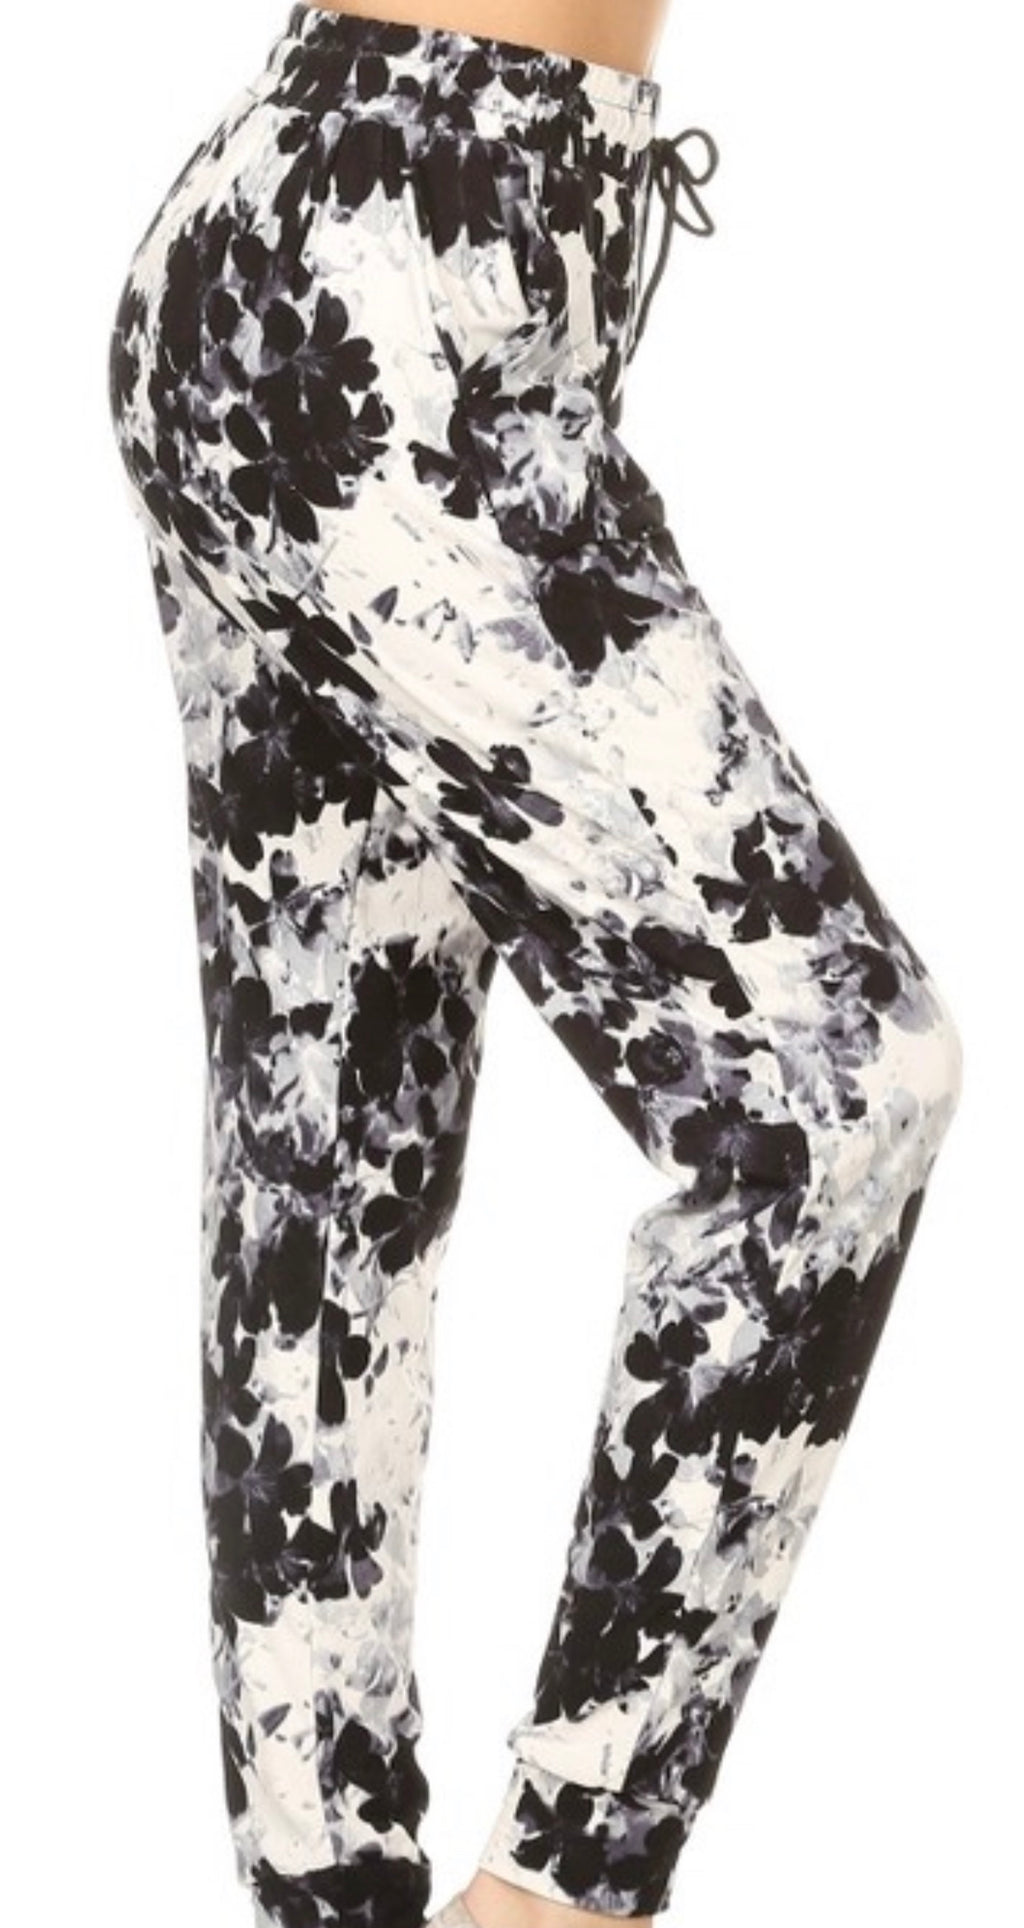 B/W FLORAL joggers with solid trim, drawstring waistband, waist pockets, and cuffed hems